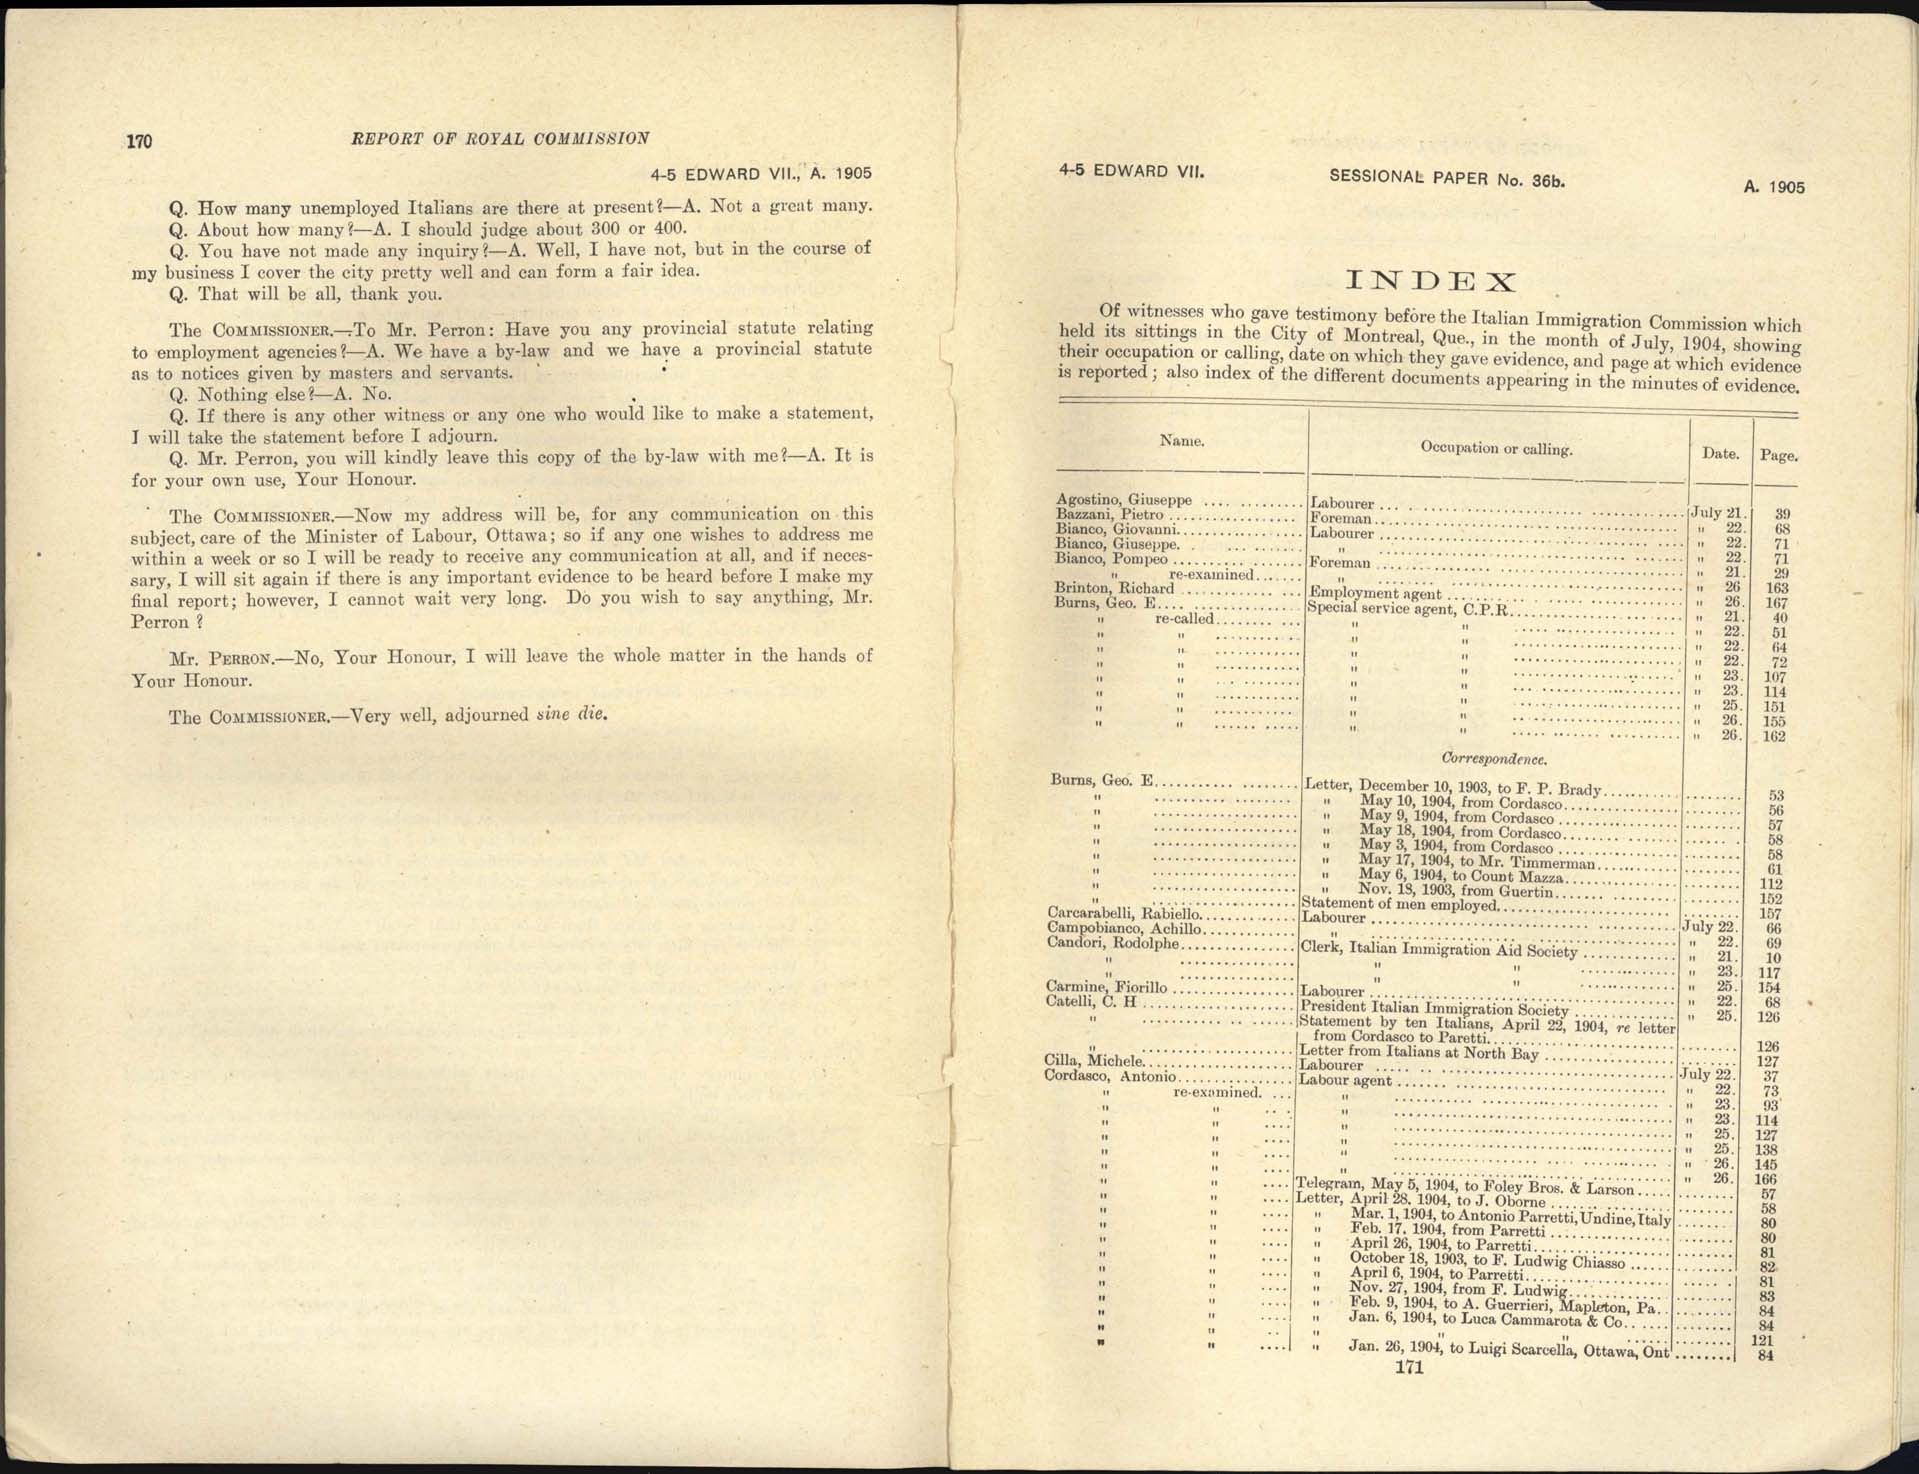 Page 170, 171 Royal Commission on Italian Immigration, 1904-1905